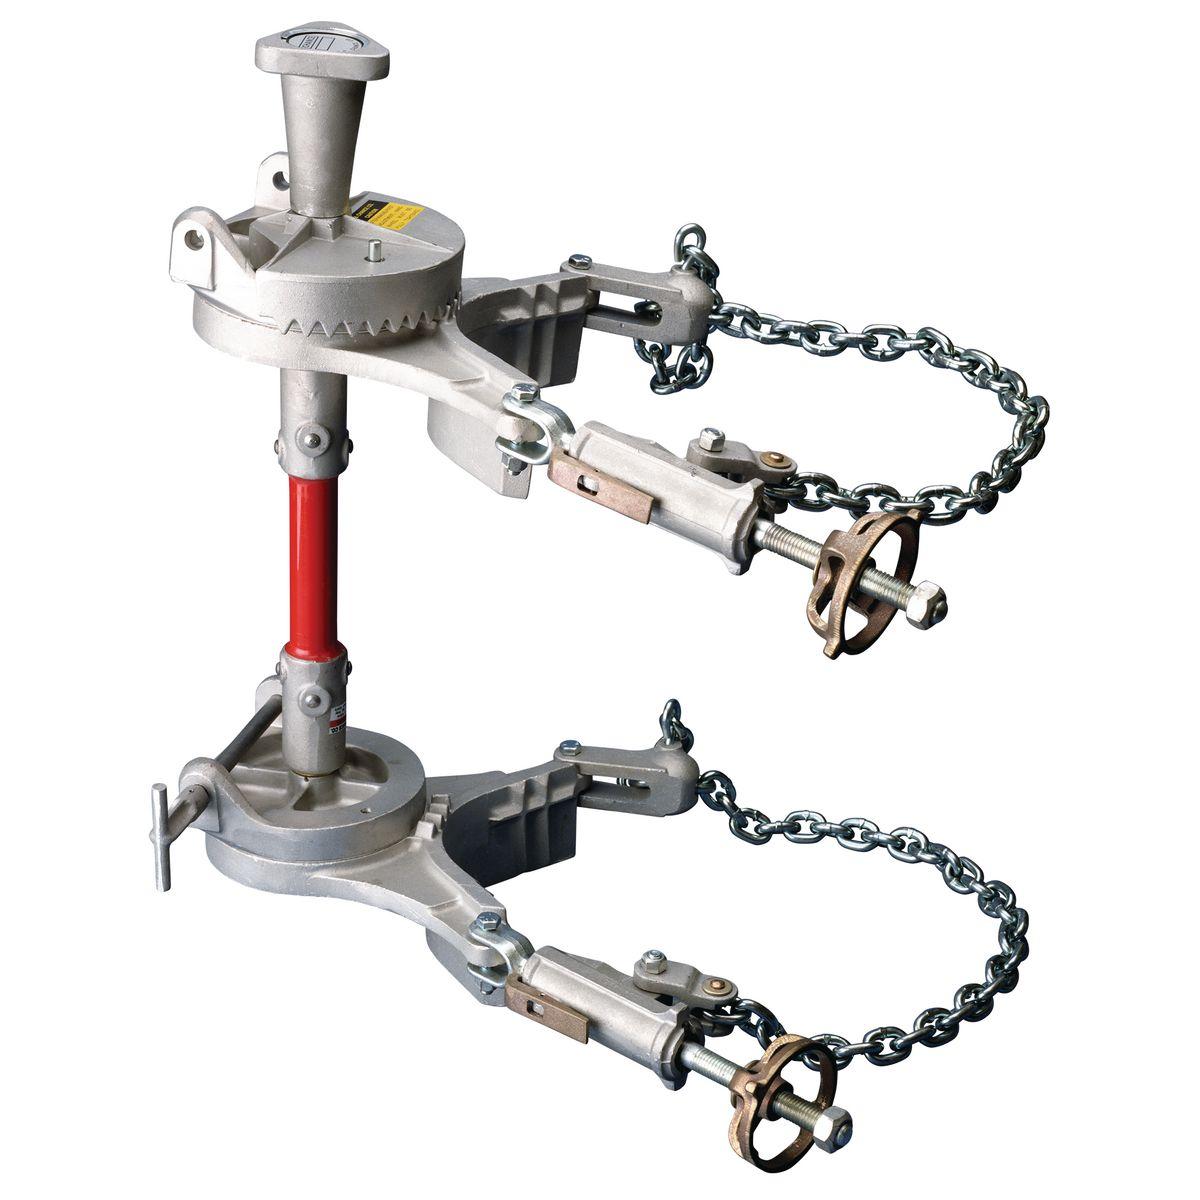 Hubbell C4021164 Pivot Base For 42" or 4' Platforms. Includes Two 30" Chain Binders With Self-Locking Handwheels And One Hinge Pin  ; Handwheel on top and interlocking teeth on two pivot plates provide simple, sure adjustment to work angle needed ; Two sizes vary in heigh